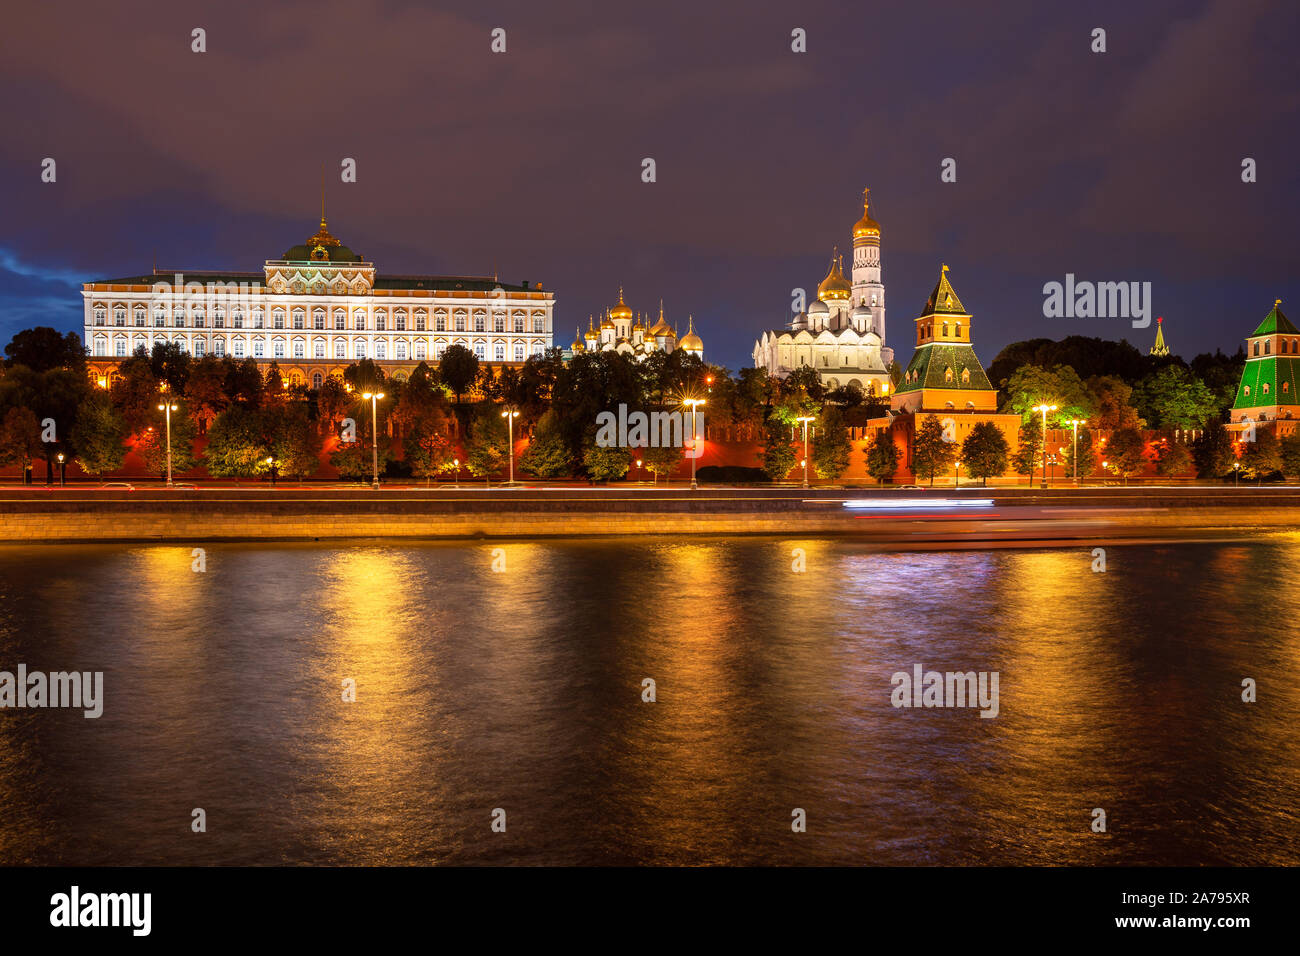 Night view of the Grand Kremlin Palace, Ivan the Great Belltower, and the Moskva River, Moscow, Russia Stock Photo